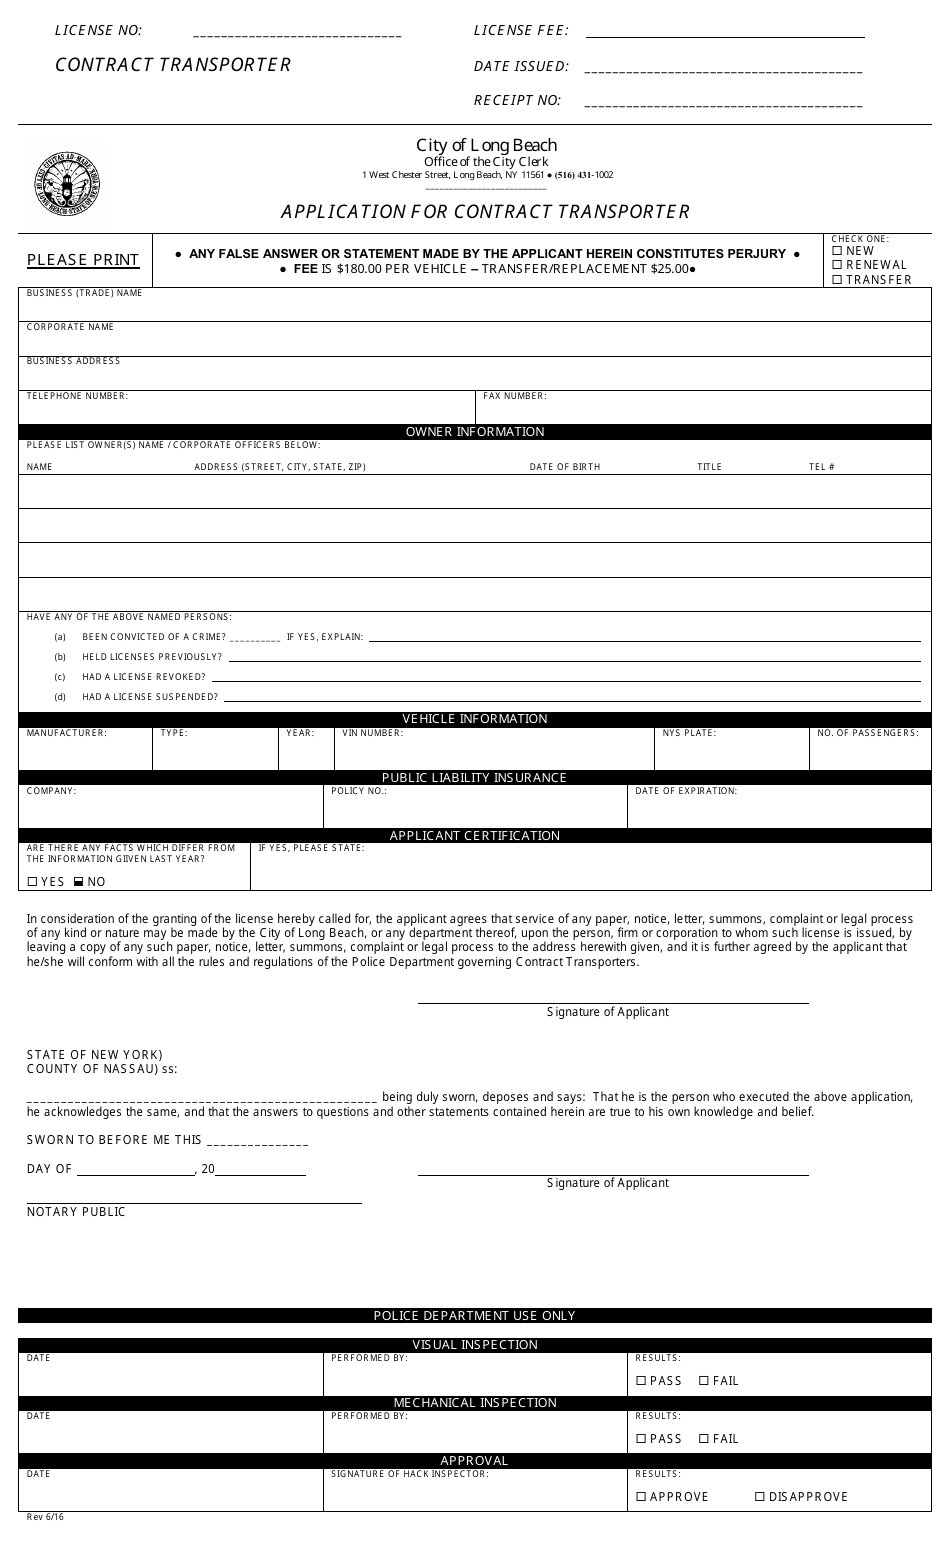 Application for Contract Transporter - City of Long Beach, New York, Page 1